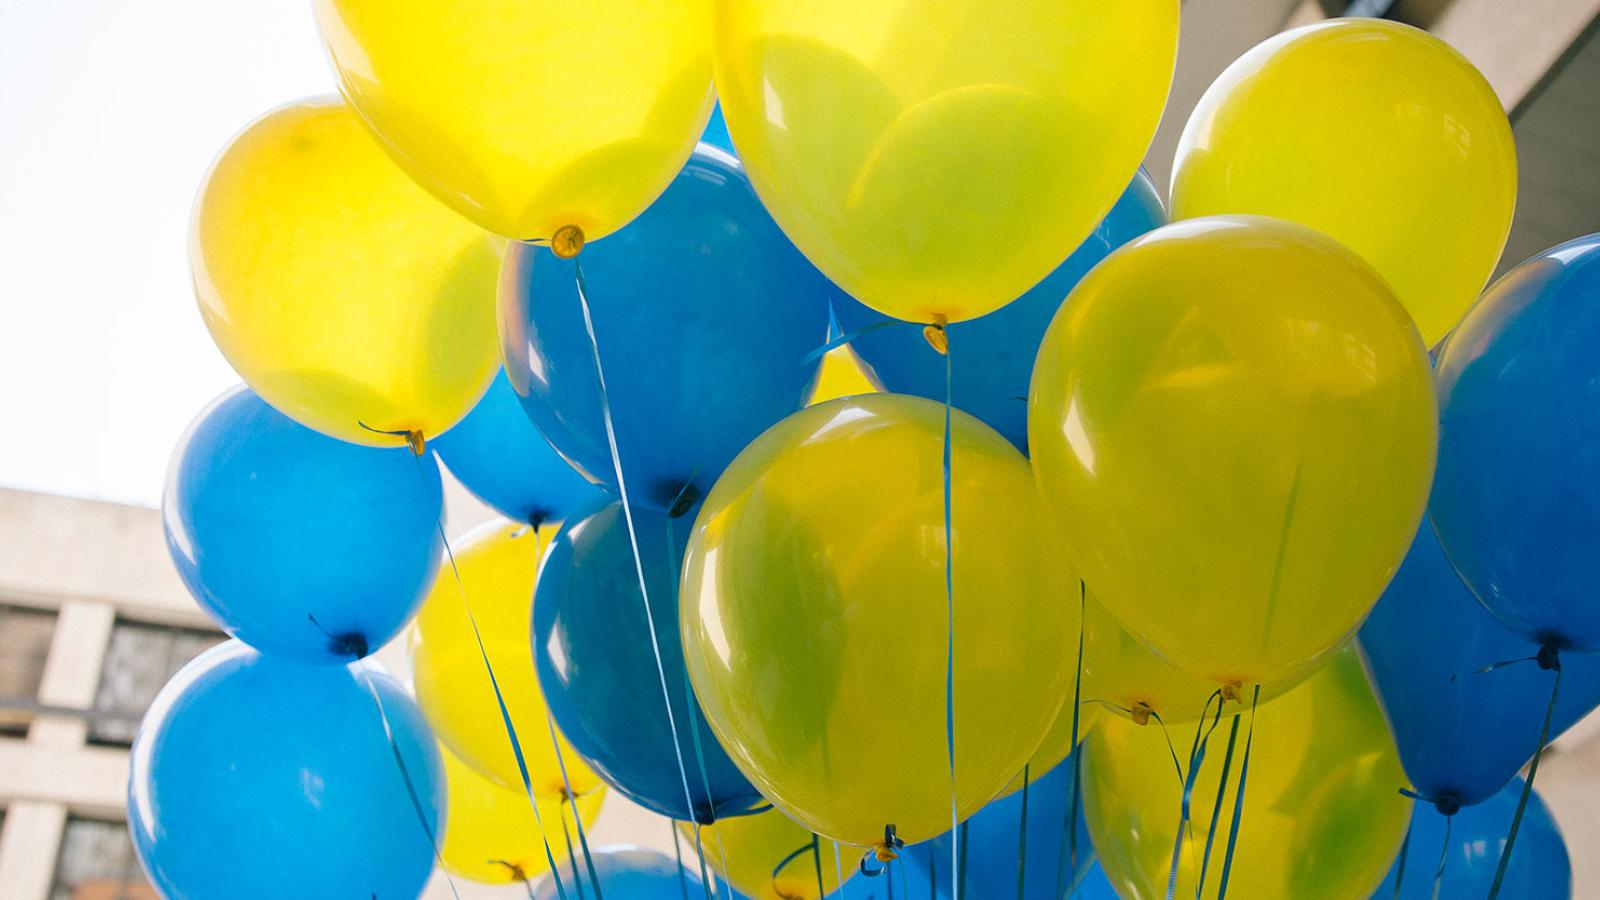 Blue and yellow balloons.